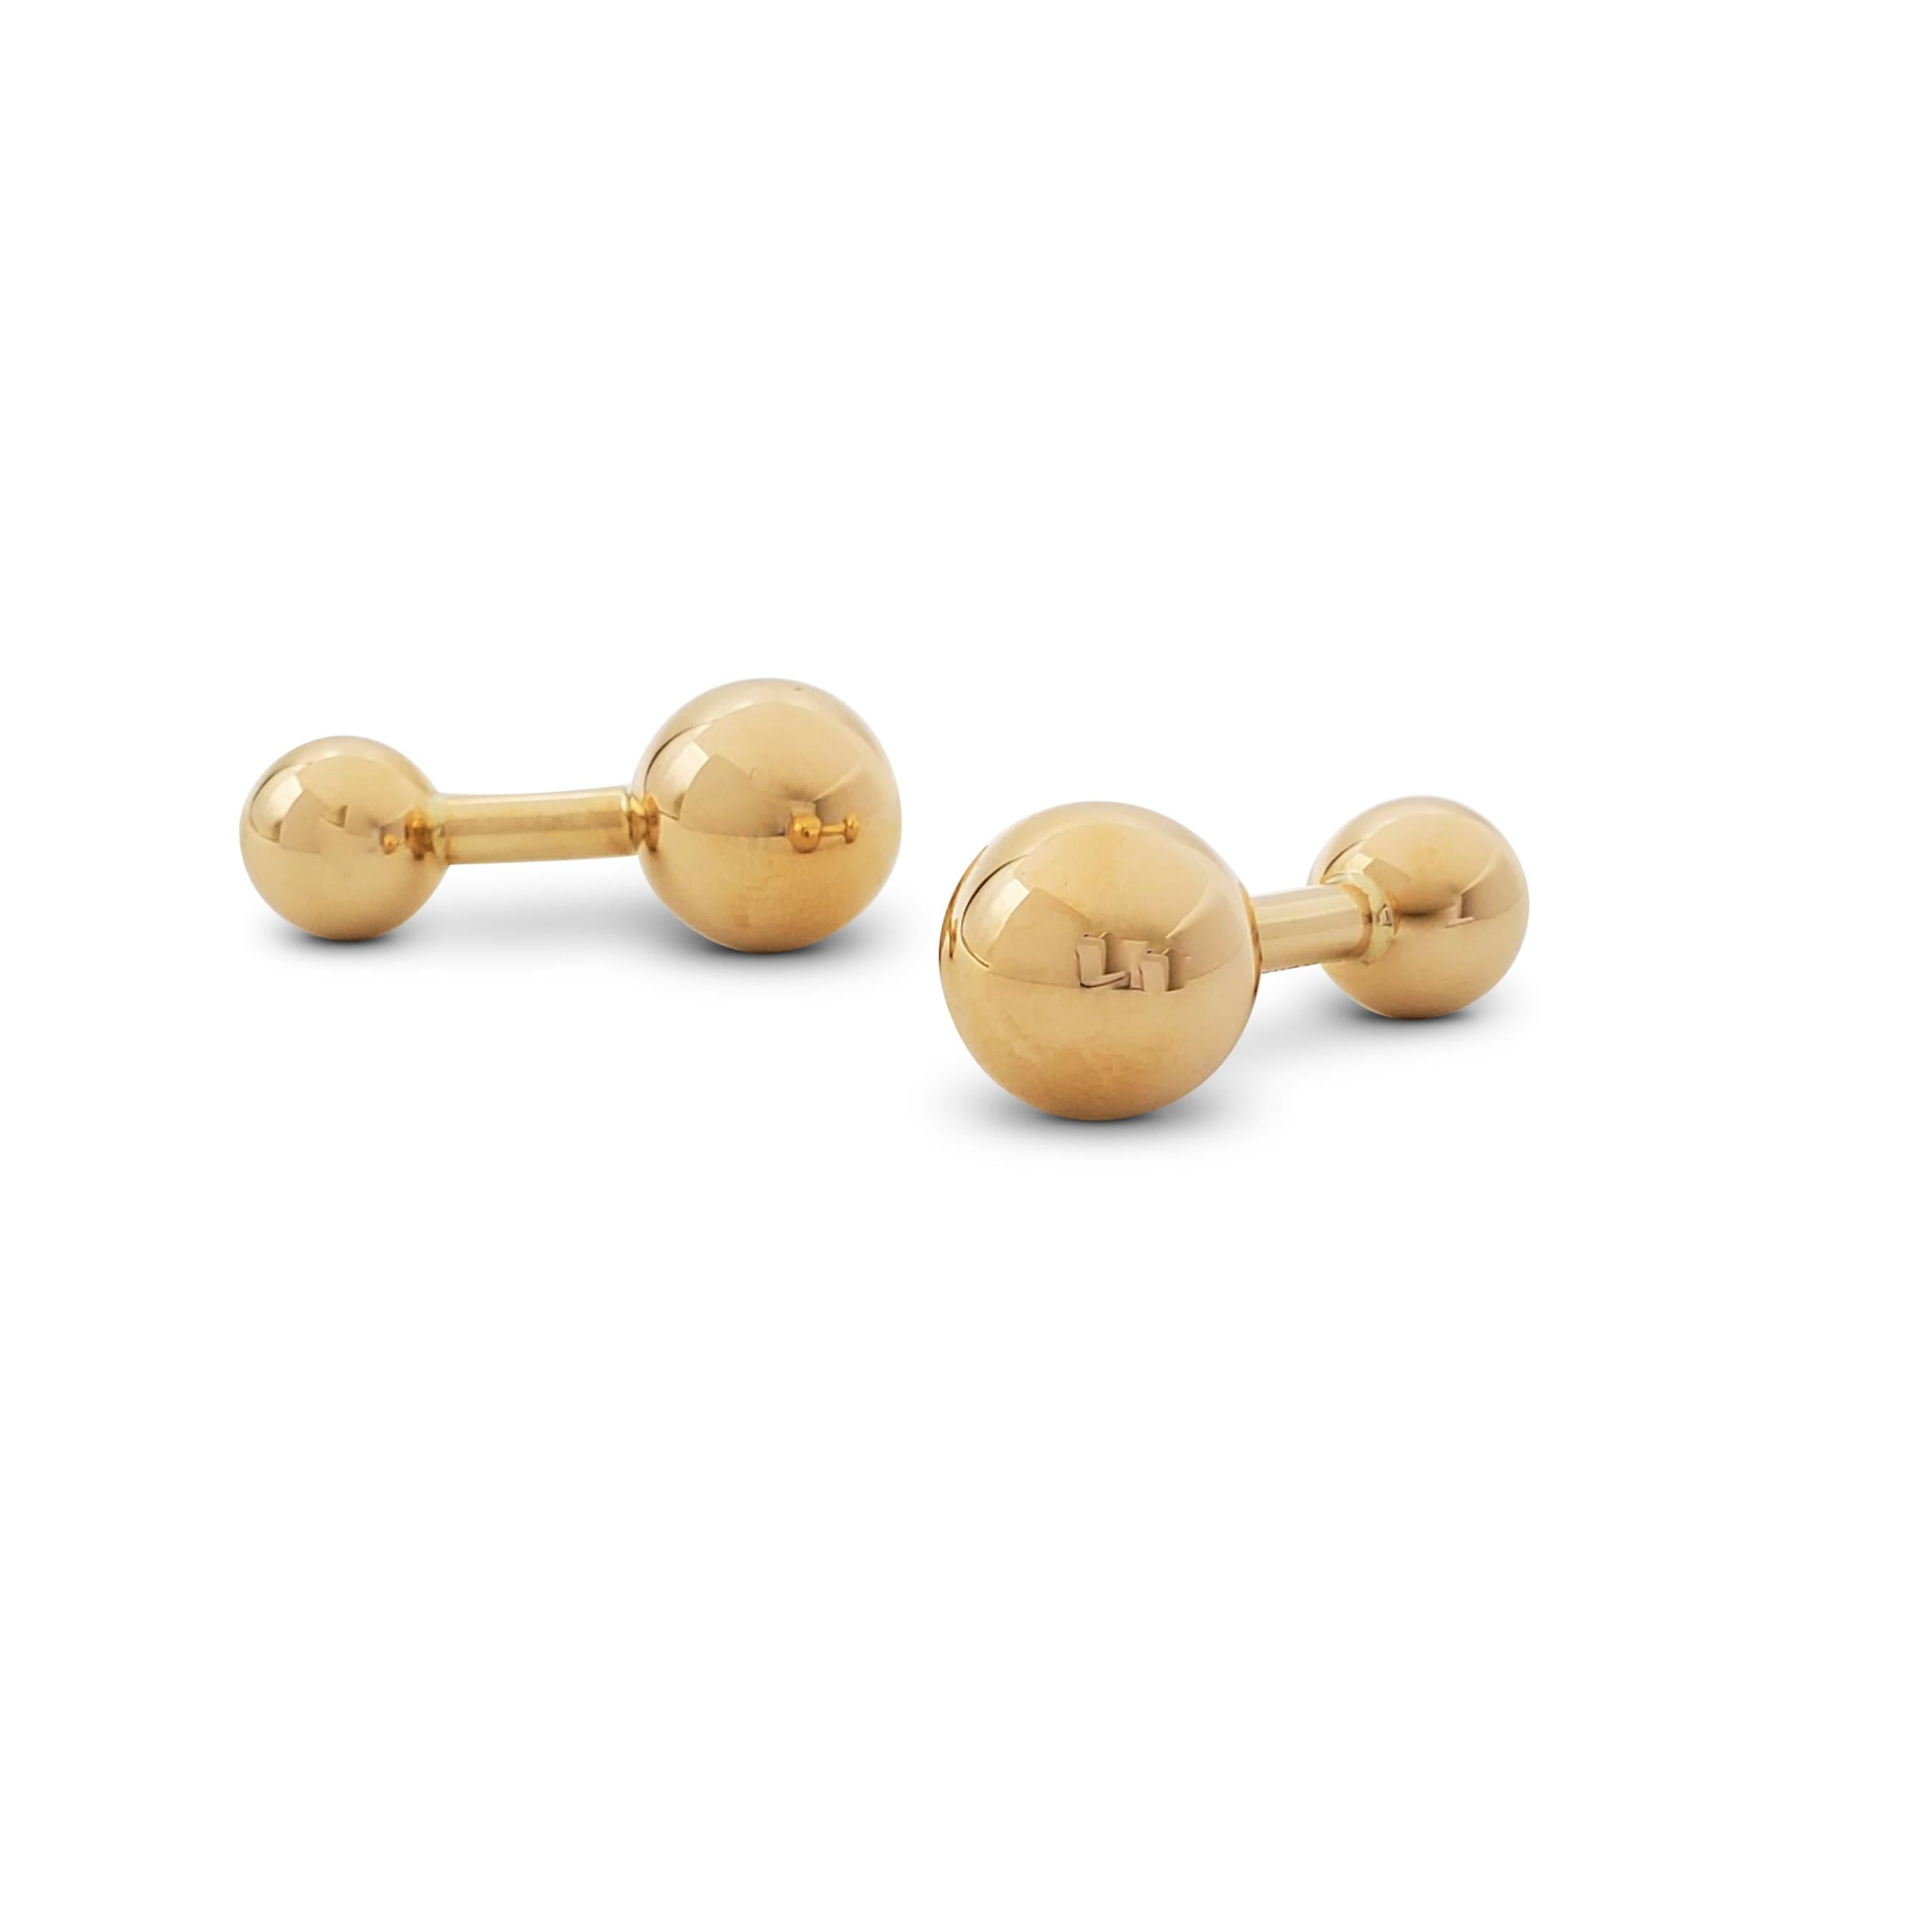 Authentic Tiffany & Co. barbell cufflinks crafted in 14 karat yellow gold. Signed Tiffany & Co., 14K. The larger barbell measures approximately 12 x 12 mm. The cufflinks are 29 mm in length. Not presented with the original box or papers. CIRCA